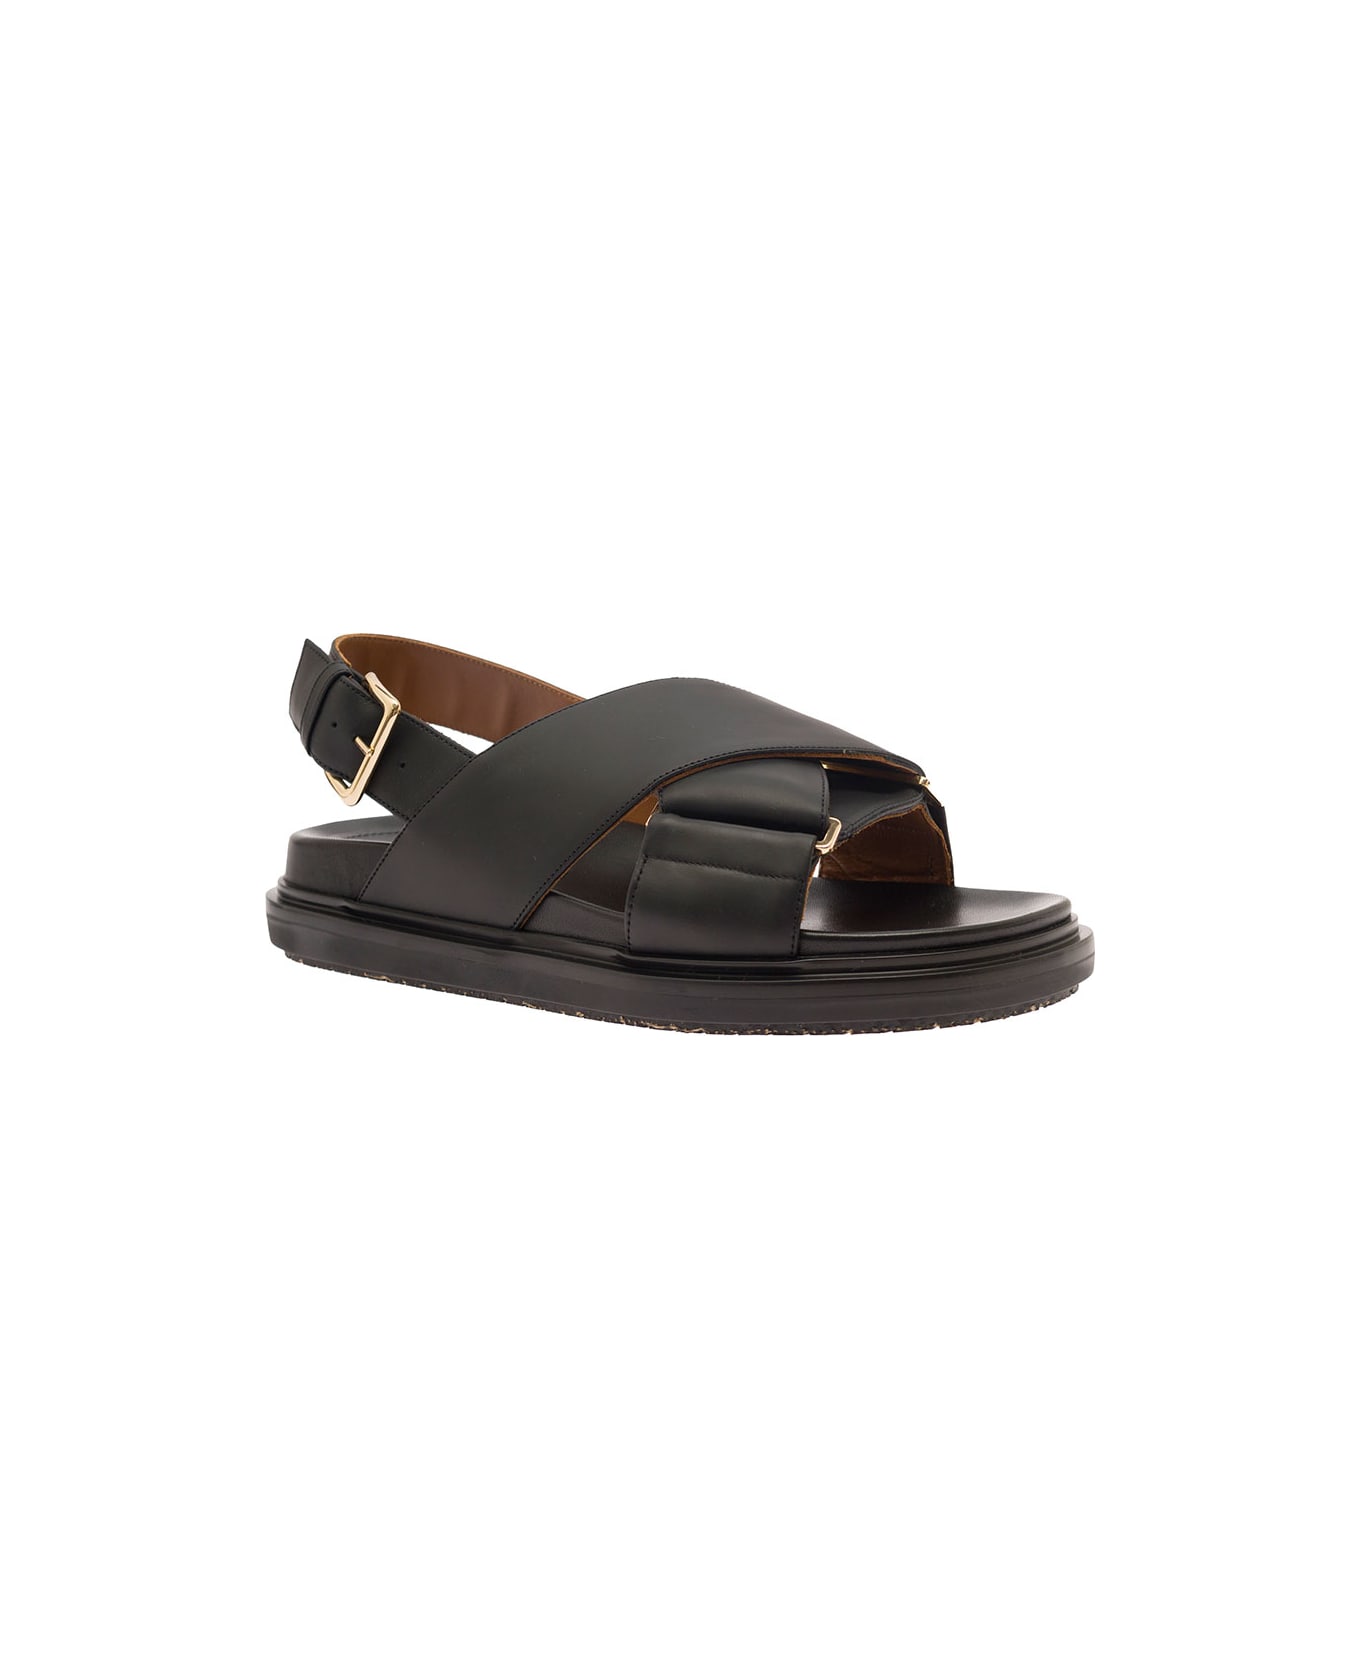 Marni Black Criss-cross Sandals In Smooth Leather Woman - Black